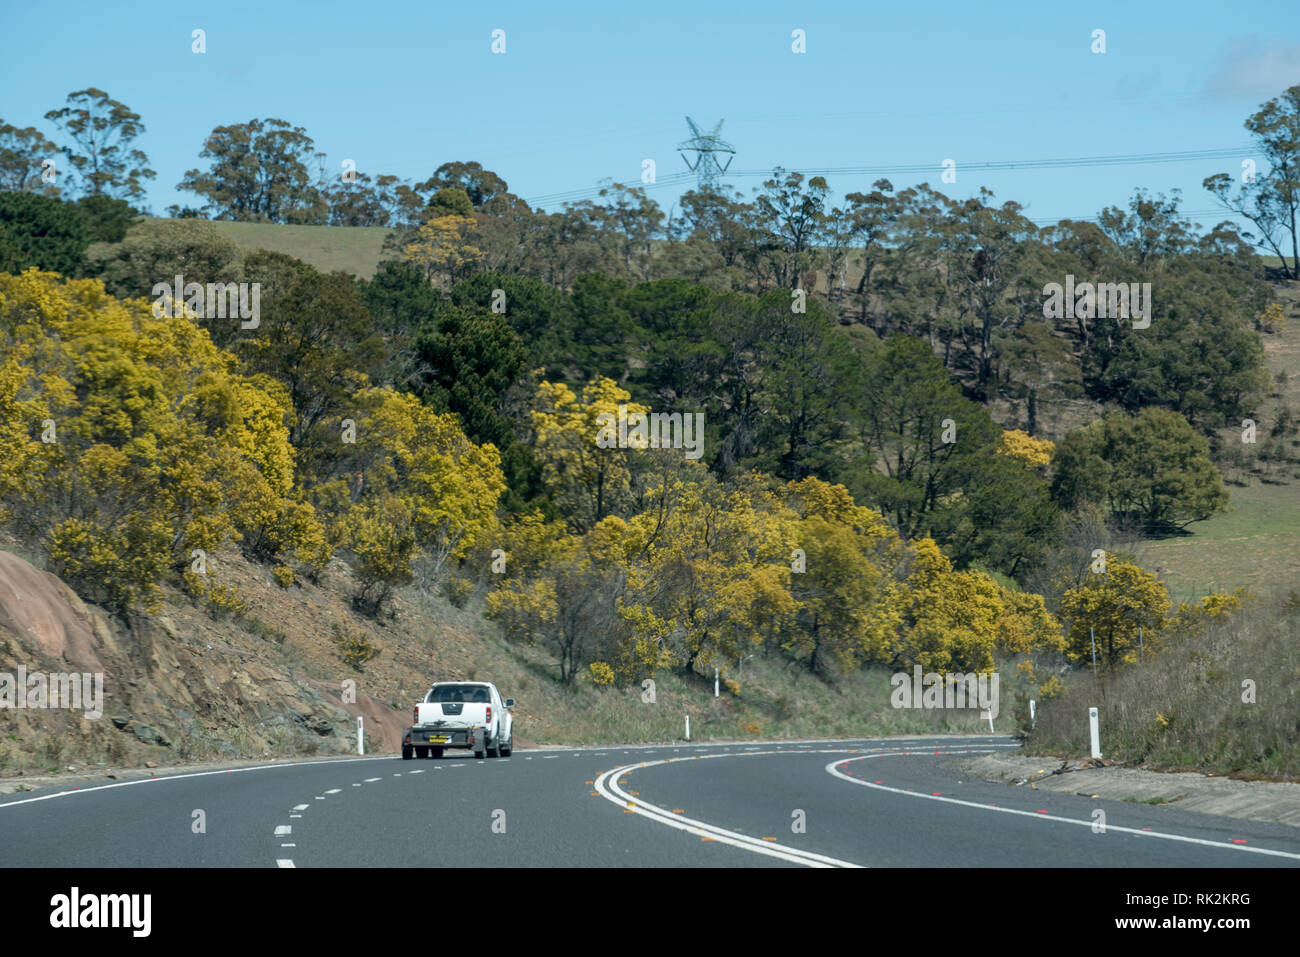 Golden Wattle (Acacia pycnantha) in full bloom, lines the road side on the Mitchell Highway heading west towards the inland centre of Bathurst NSW Stock Photo